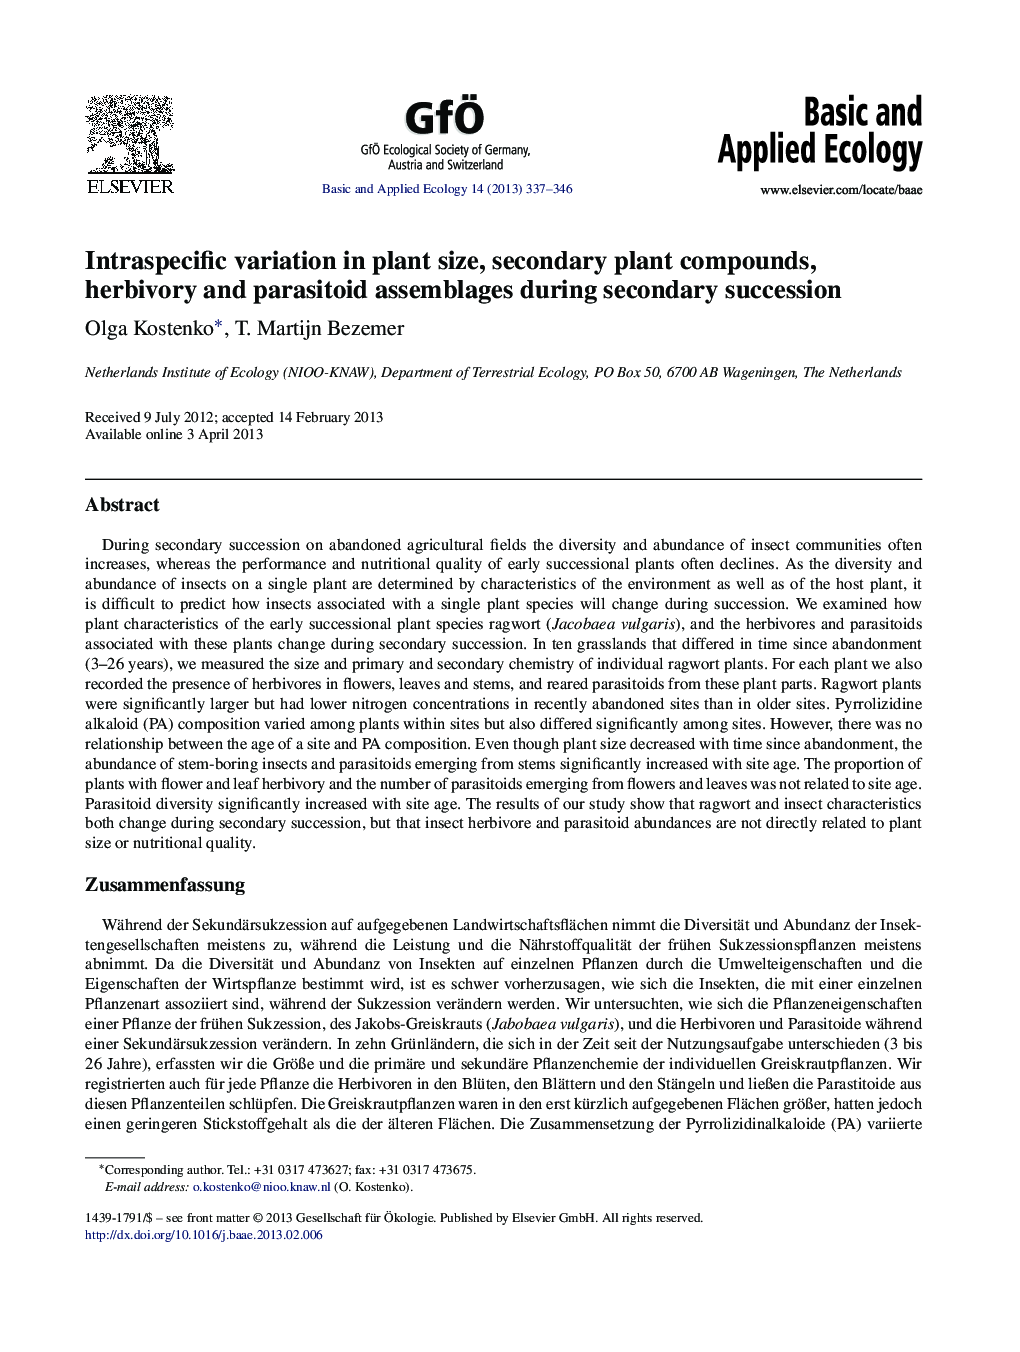 Intraspecific variation in plant size, secondary plant compounds, herbivory and parasitoid assemblages during secondary succession